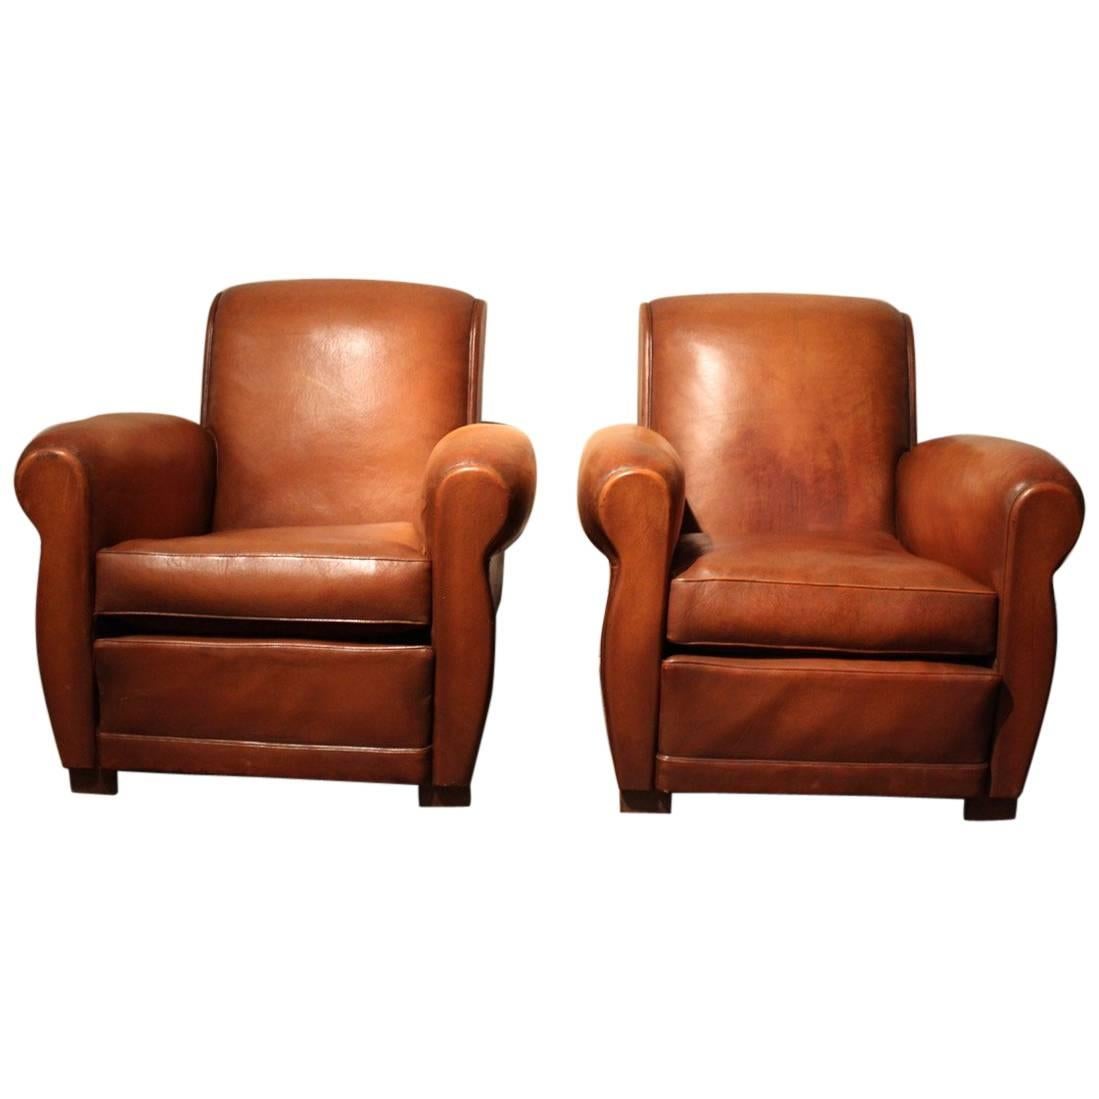 Classic Pair of 1950s French Leather Club Chairs